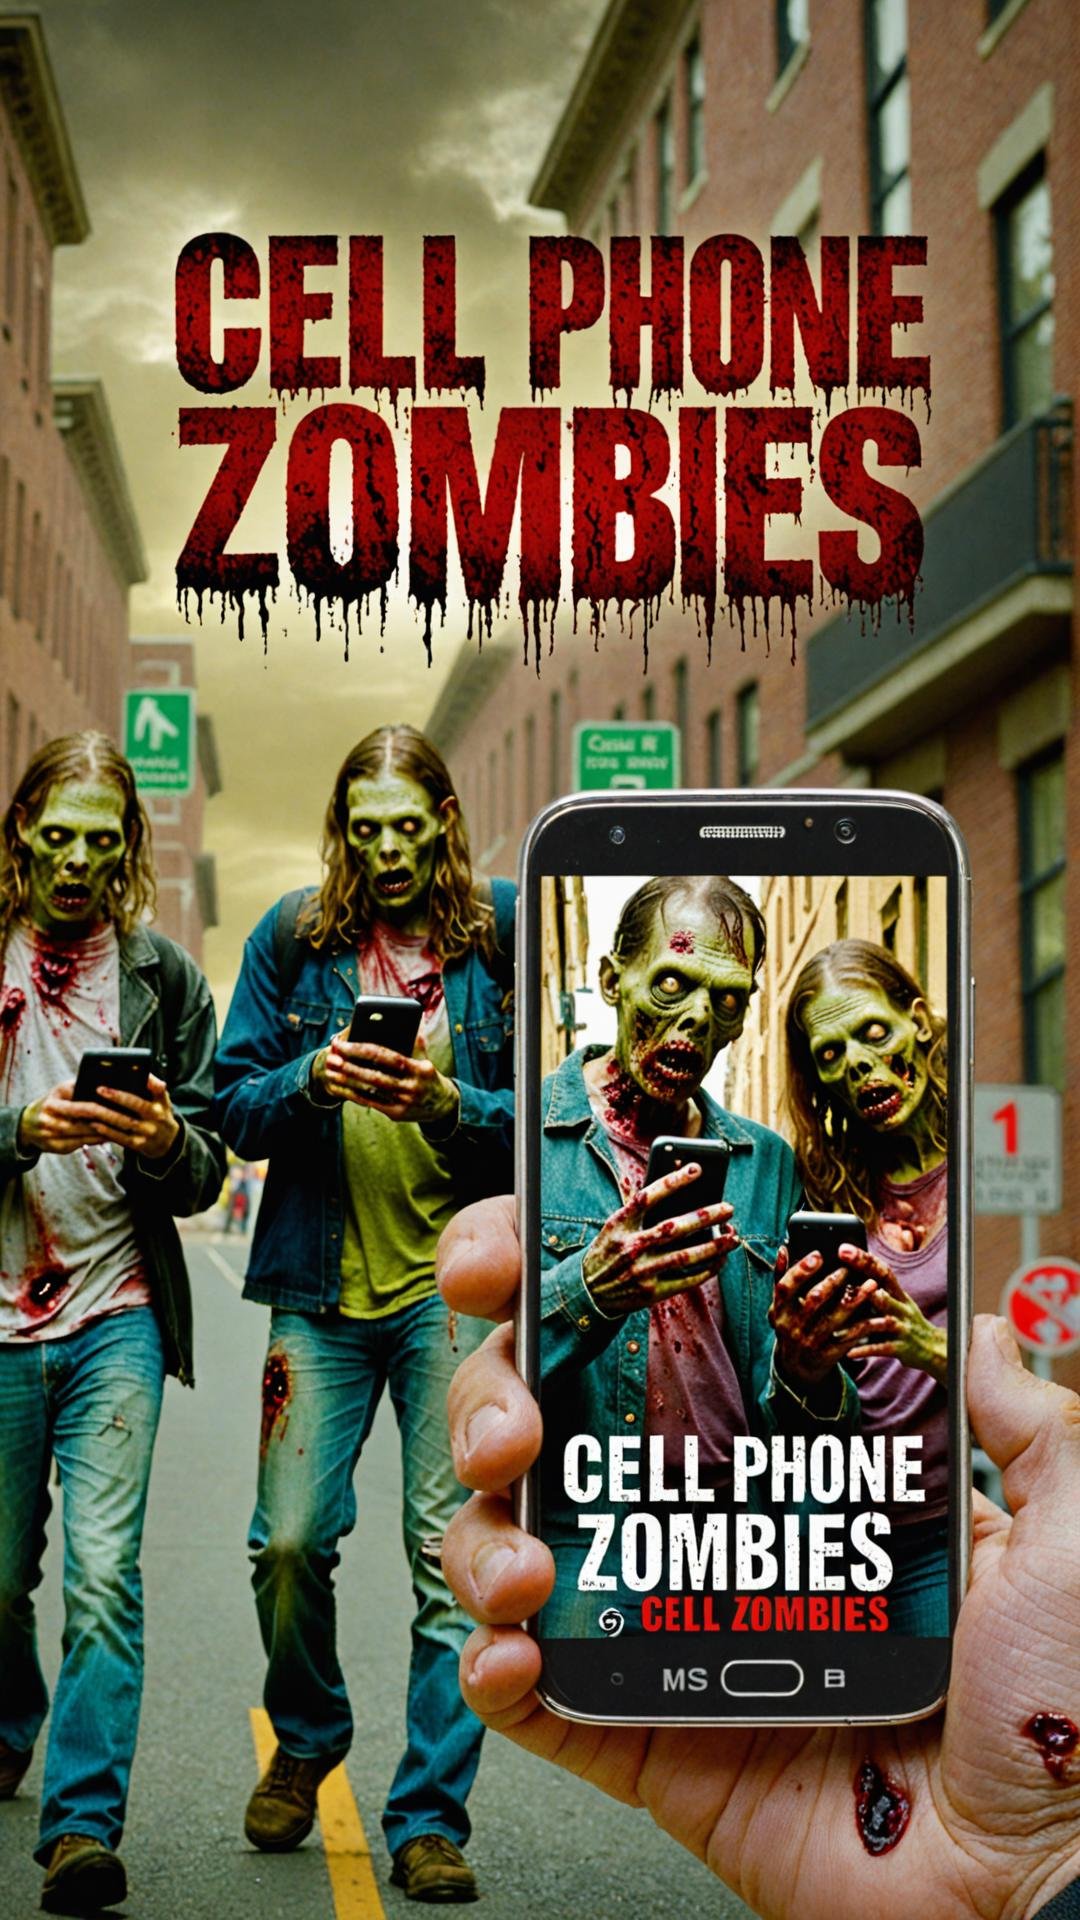 Photo of zombies looking at cellphone in street with text that says "cell phone zombies" 